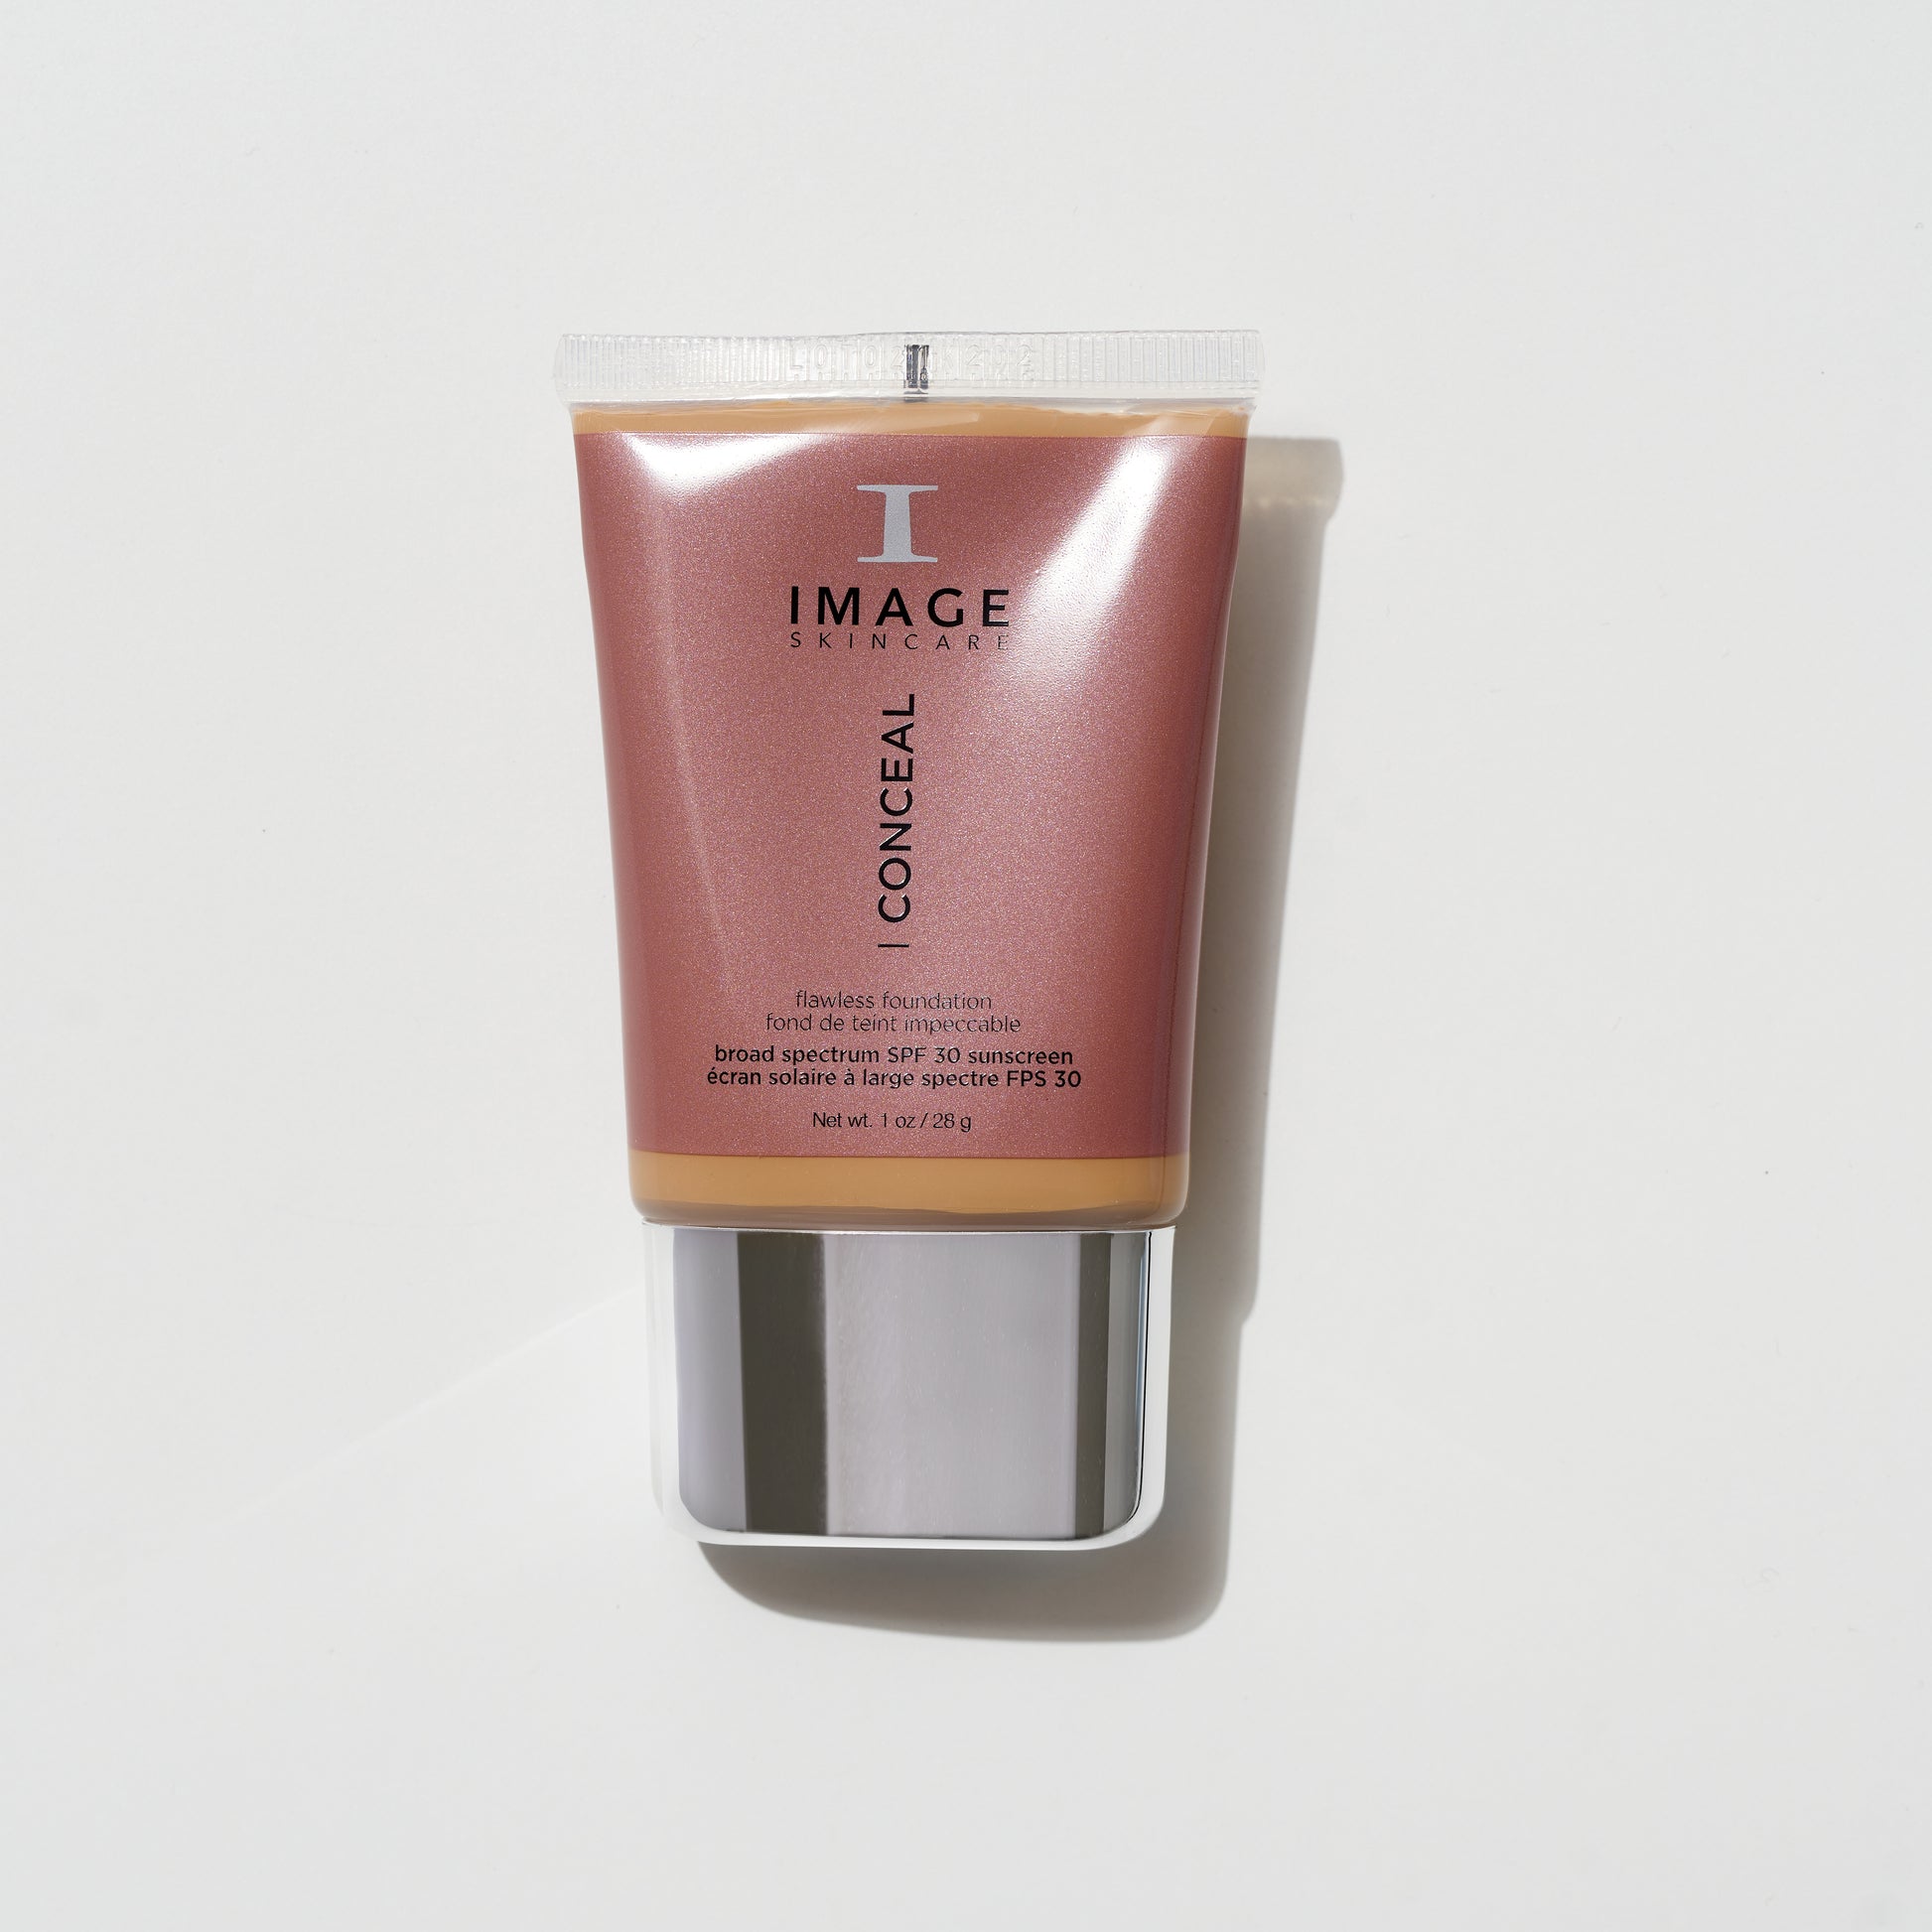 I CONCEAL flawless foundation broad-spectrum SPF 30 sunscreen suede, Image Skincare